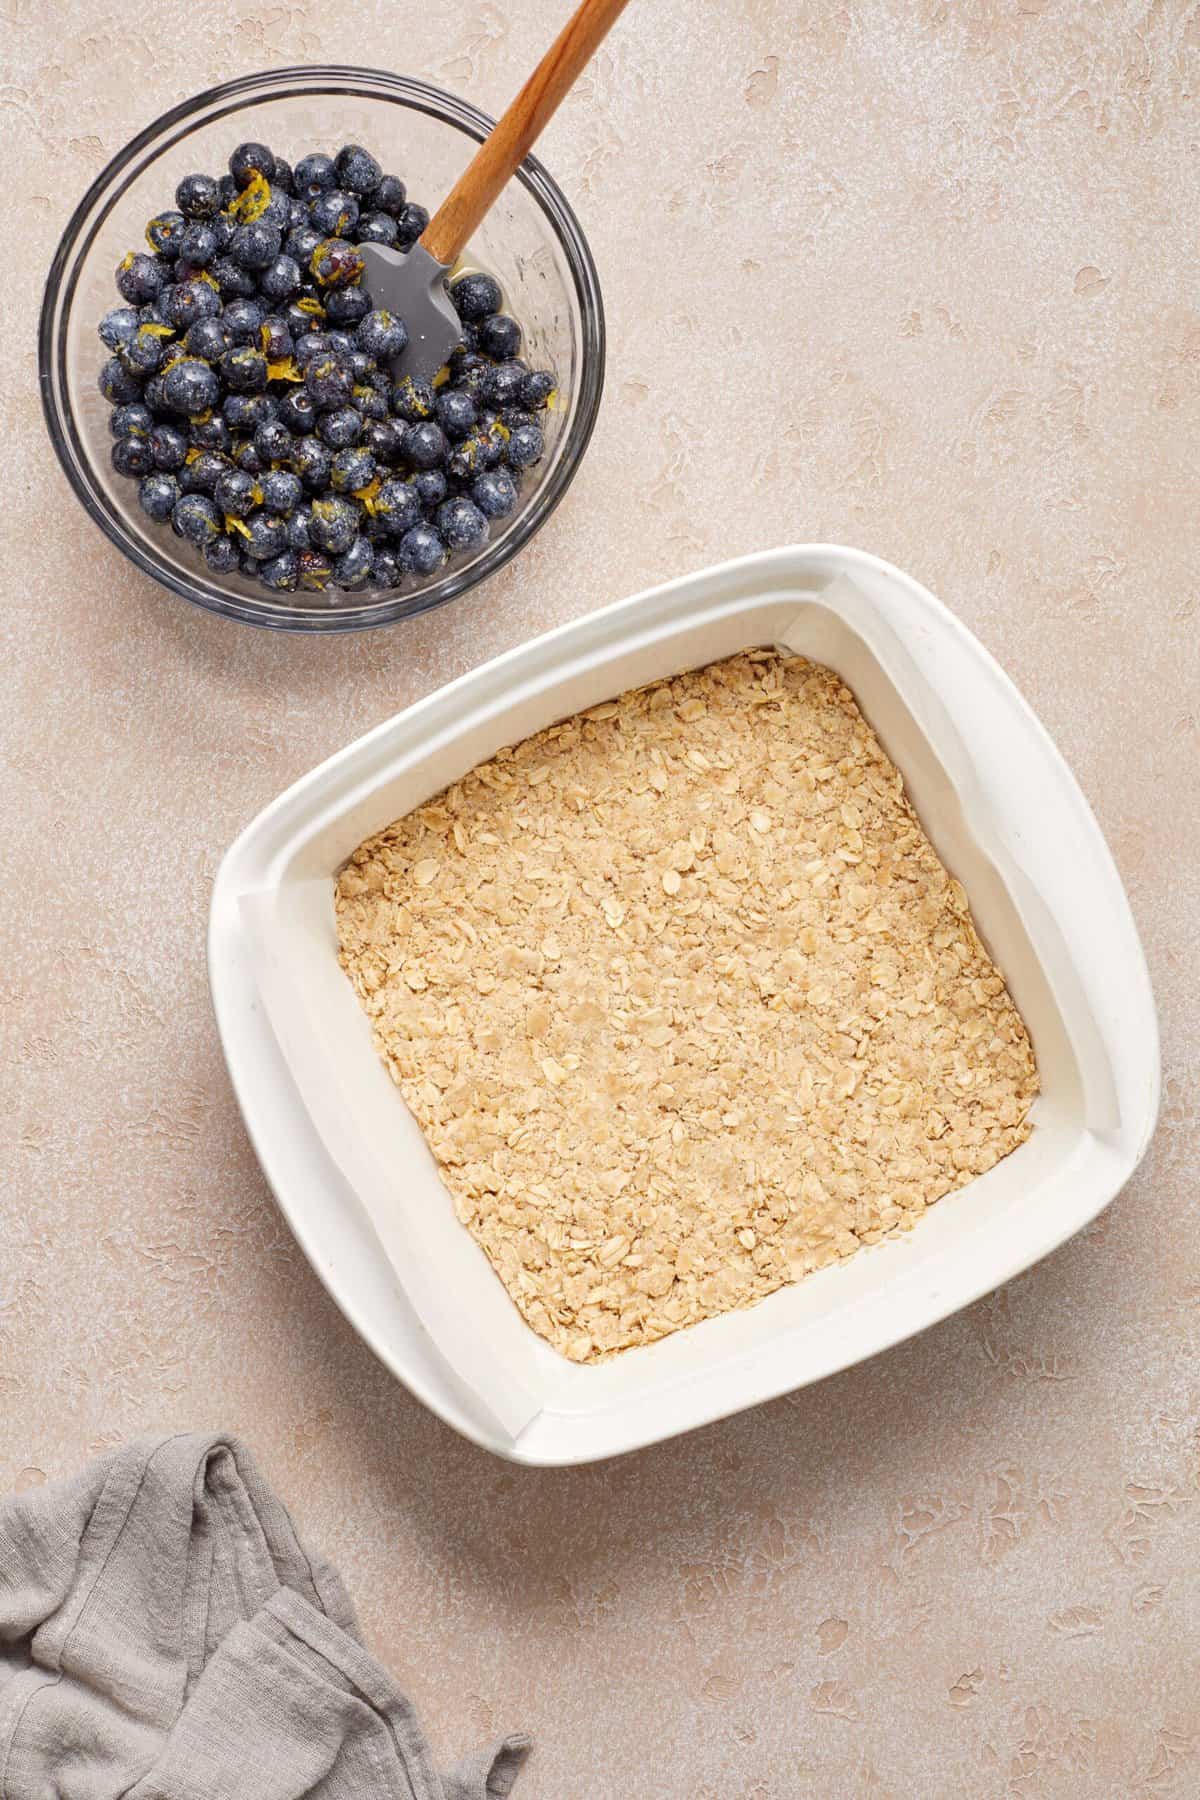 Square white baking dish filled with oatmeal mixture next to a bowl of blueberries and lemon zest